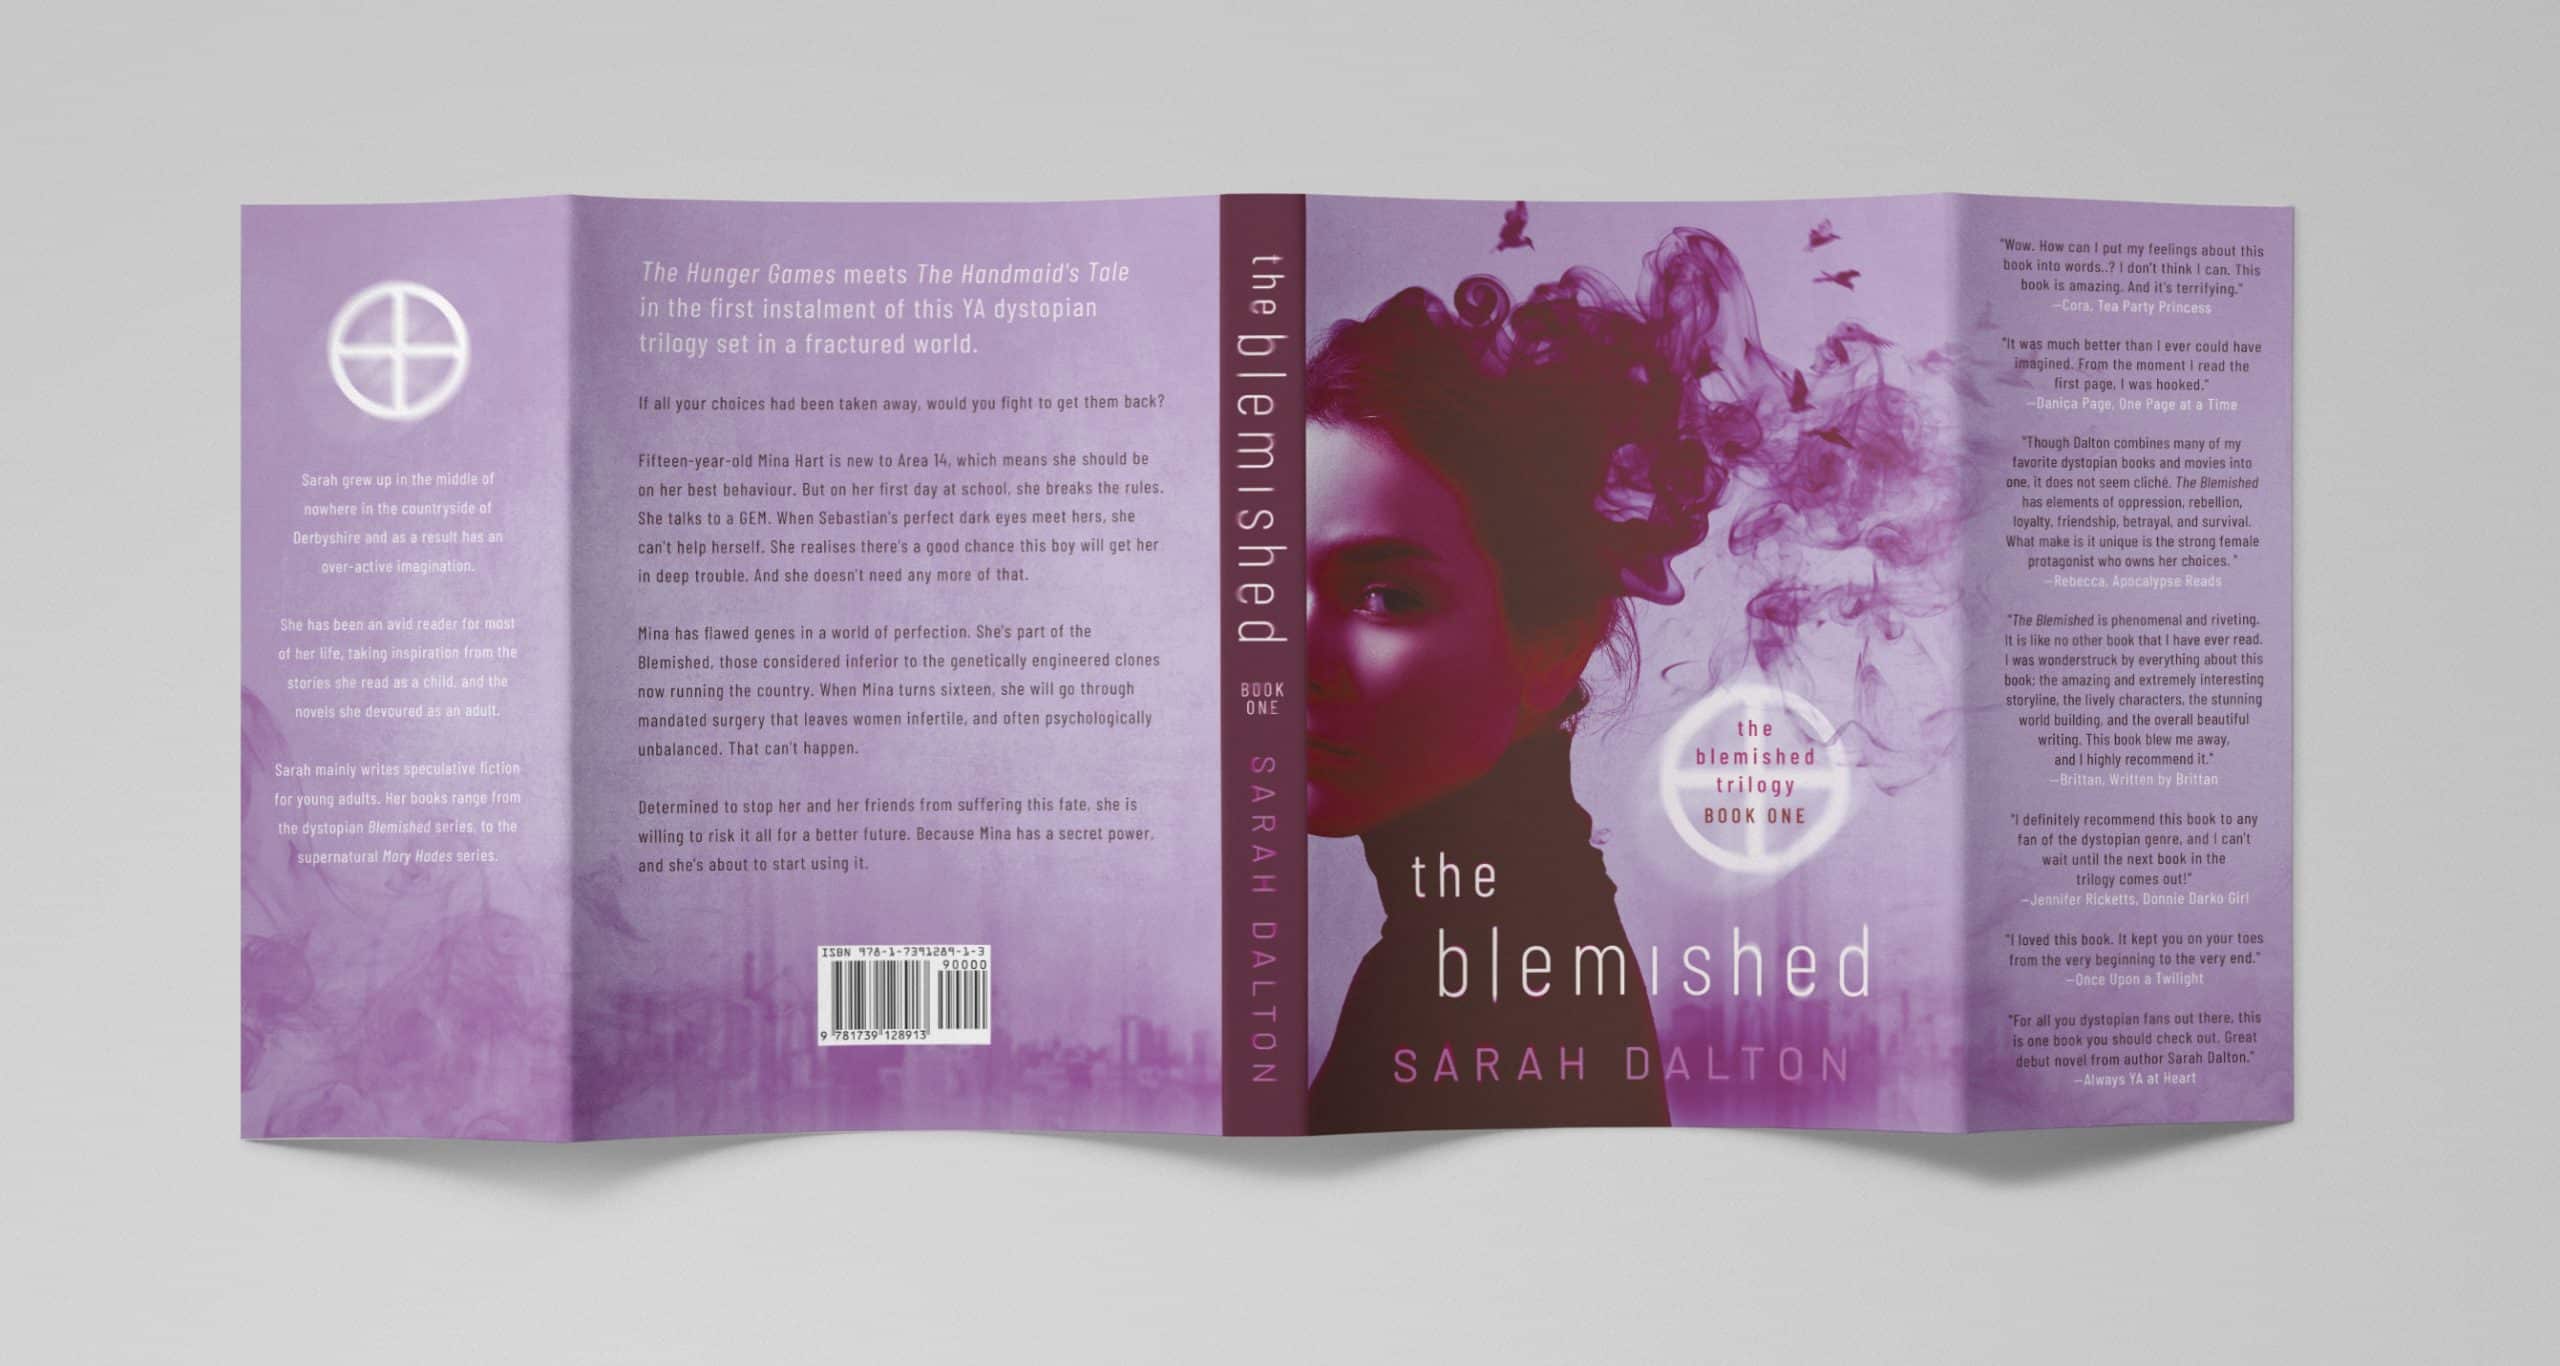 Dust jacket for books - an example layout for a series of 3 books